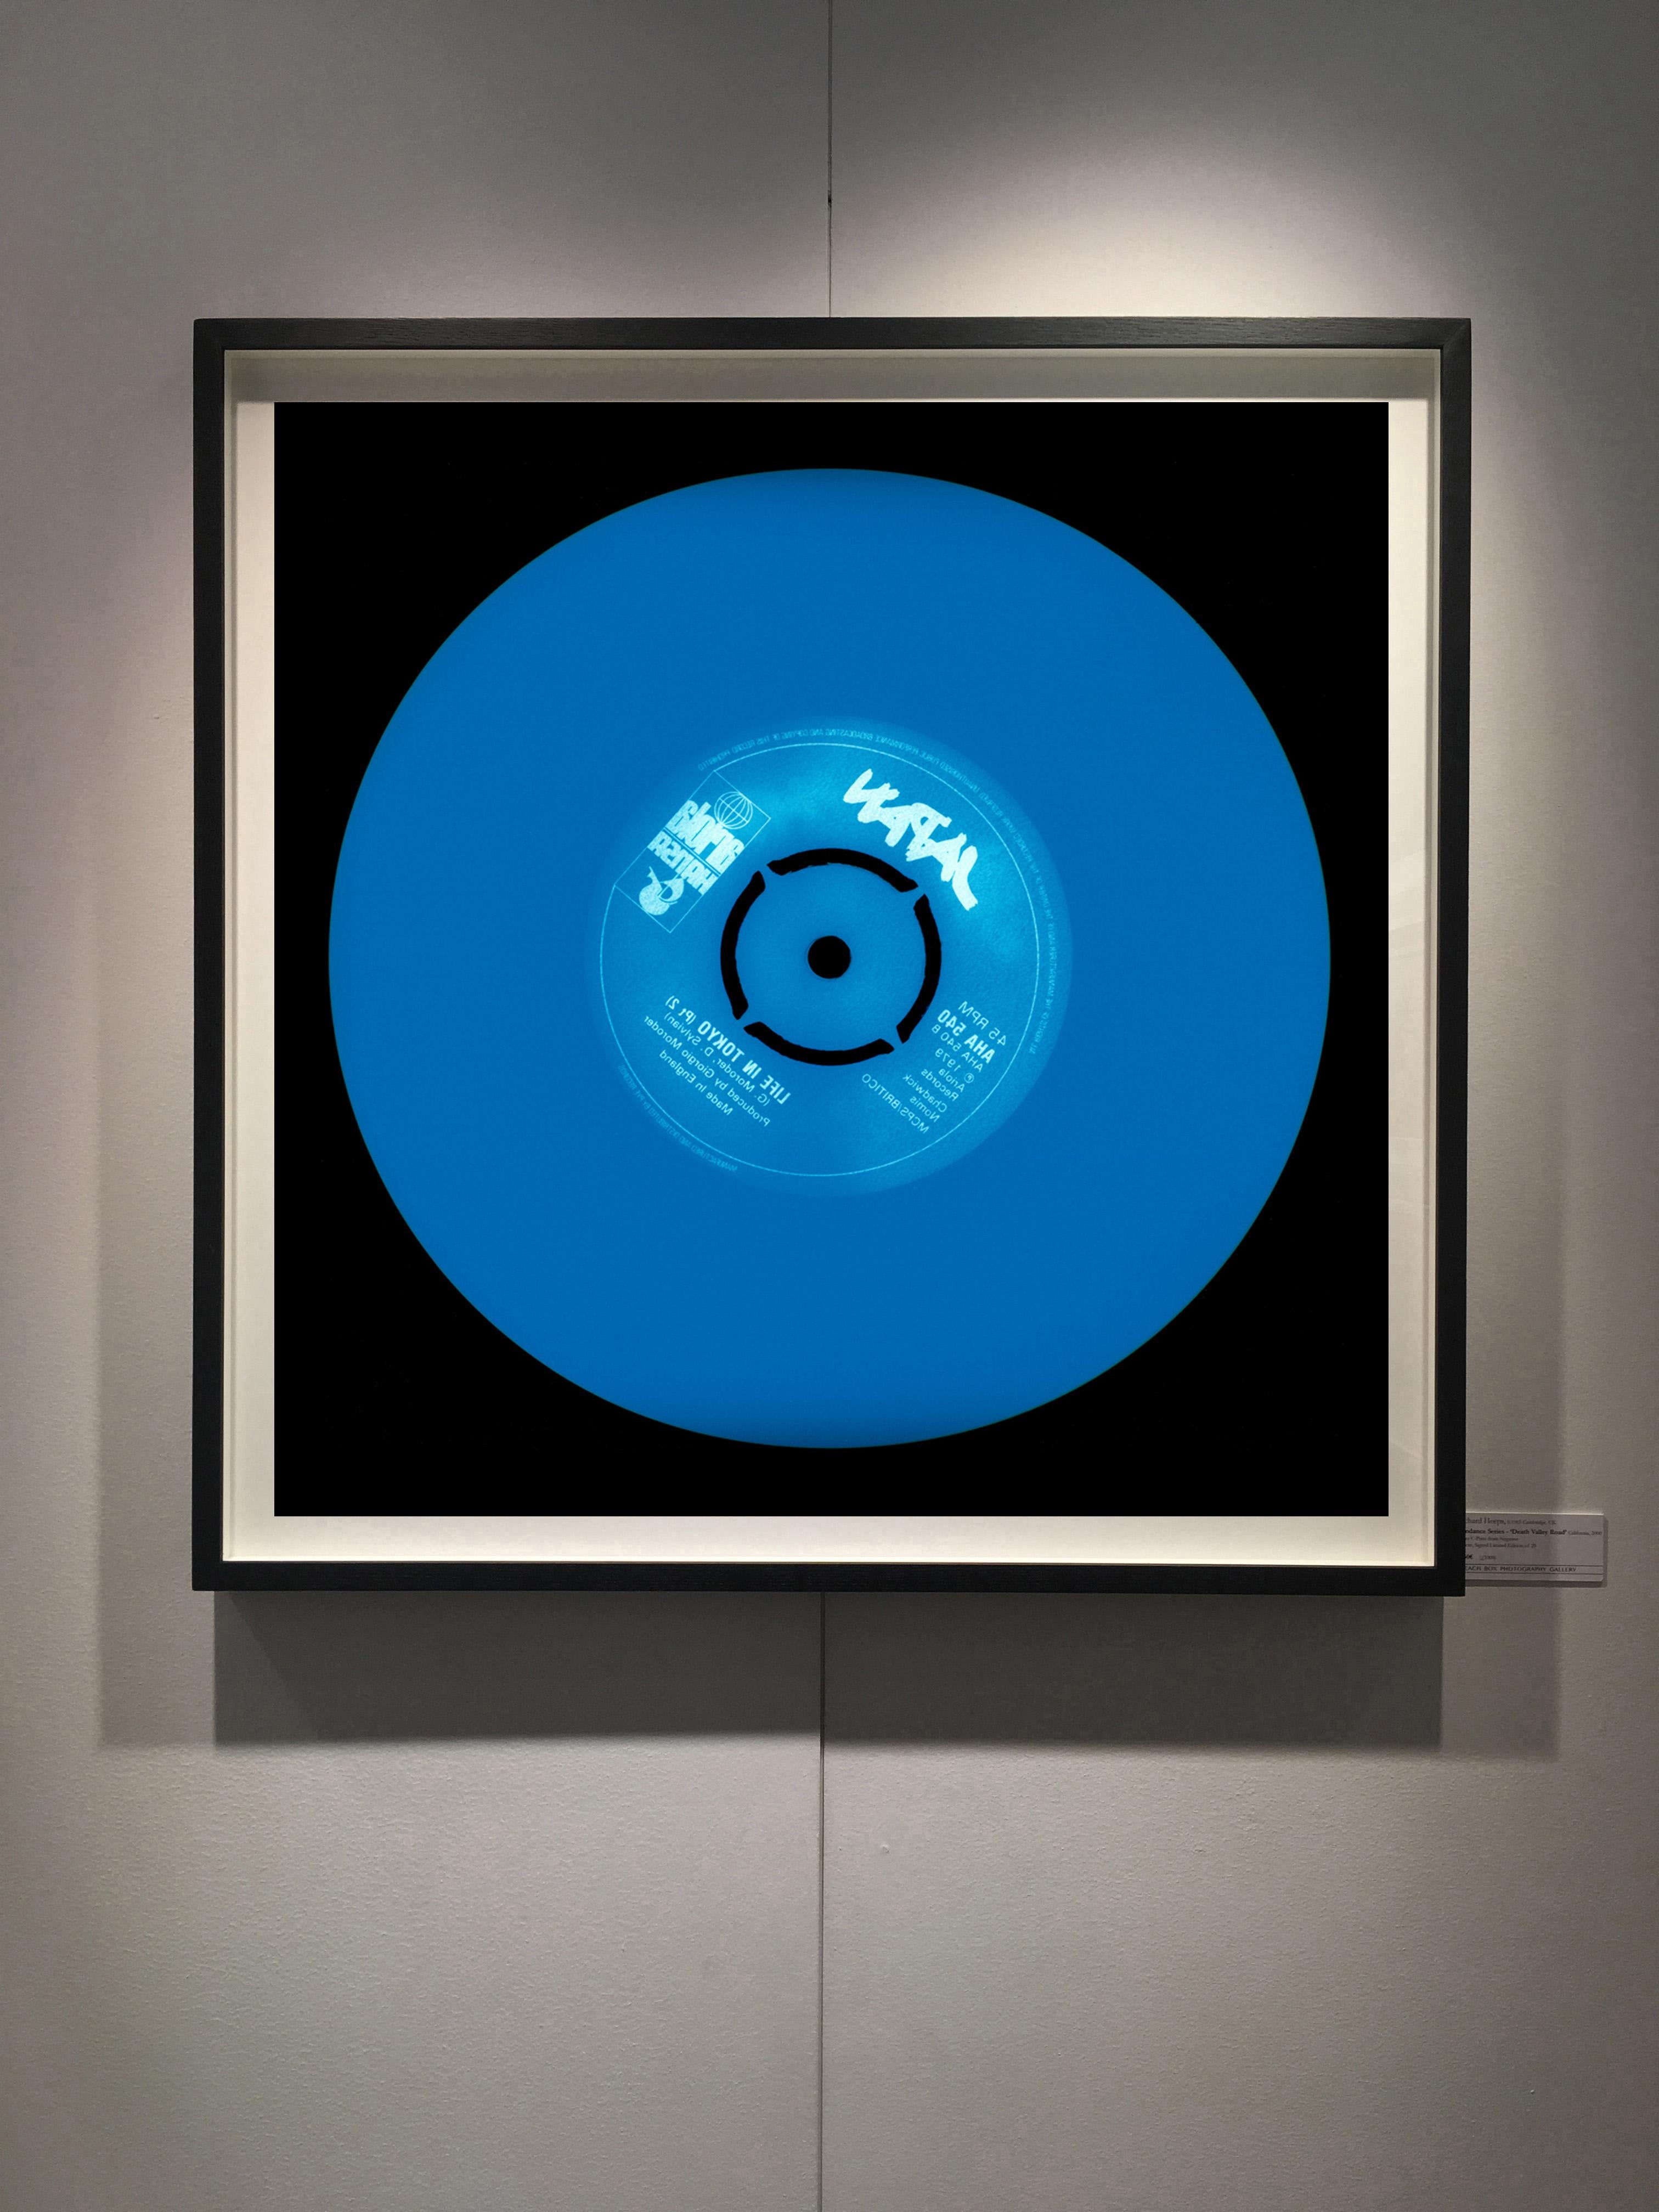 Made in England, from the Heidler & Heeps Vinyl Collection.
Acclaimed contemporary photographers, Richard Heeps and Natasha Heidler have collaborated to make this beautifully mesmerising collection. A celebration of the vinyl record and analogue